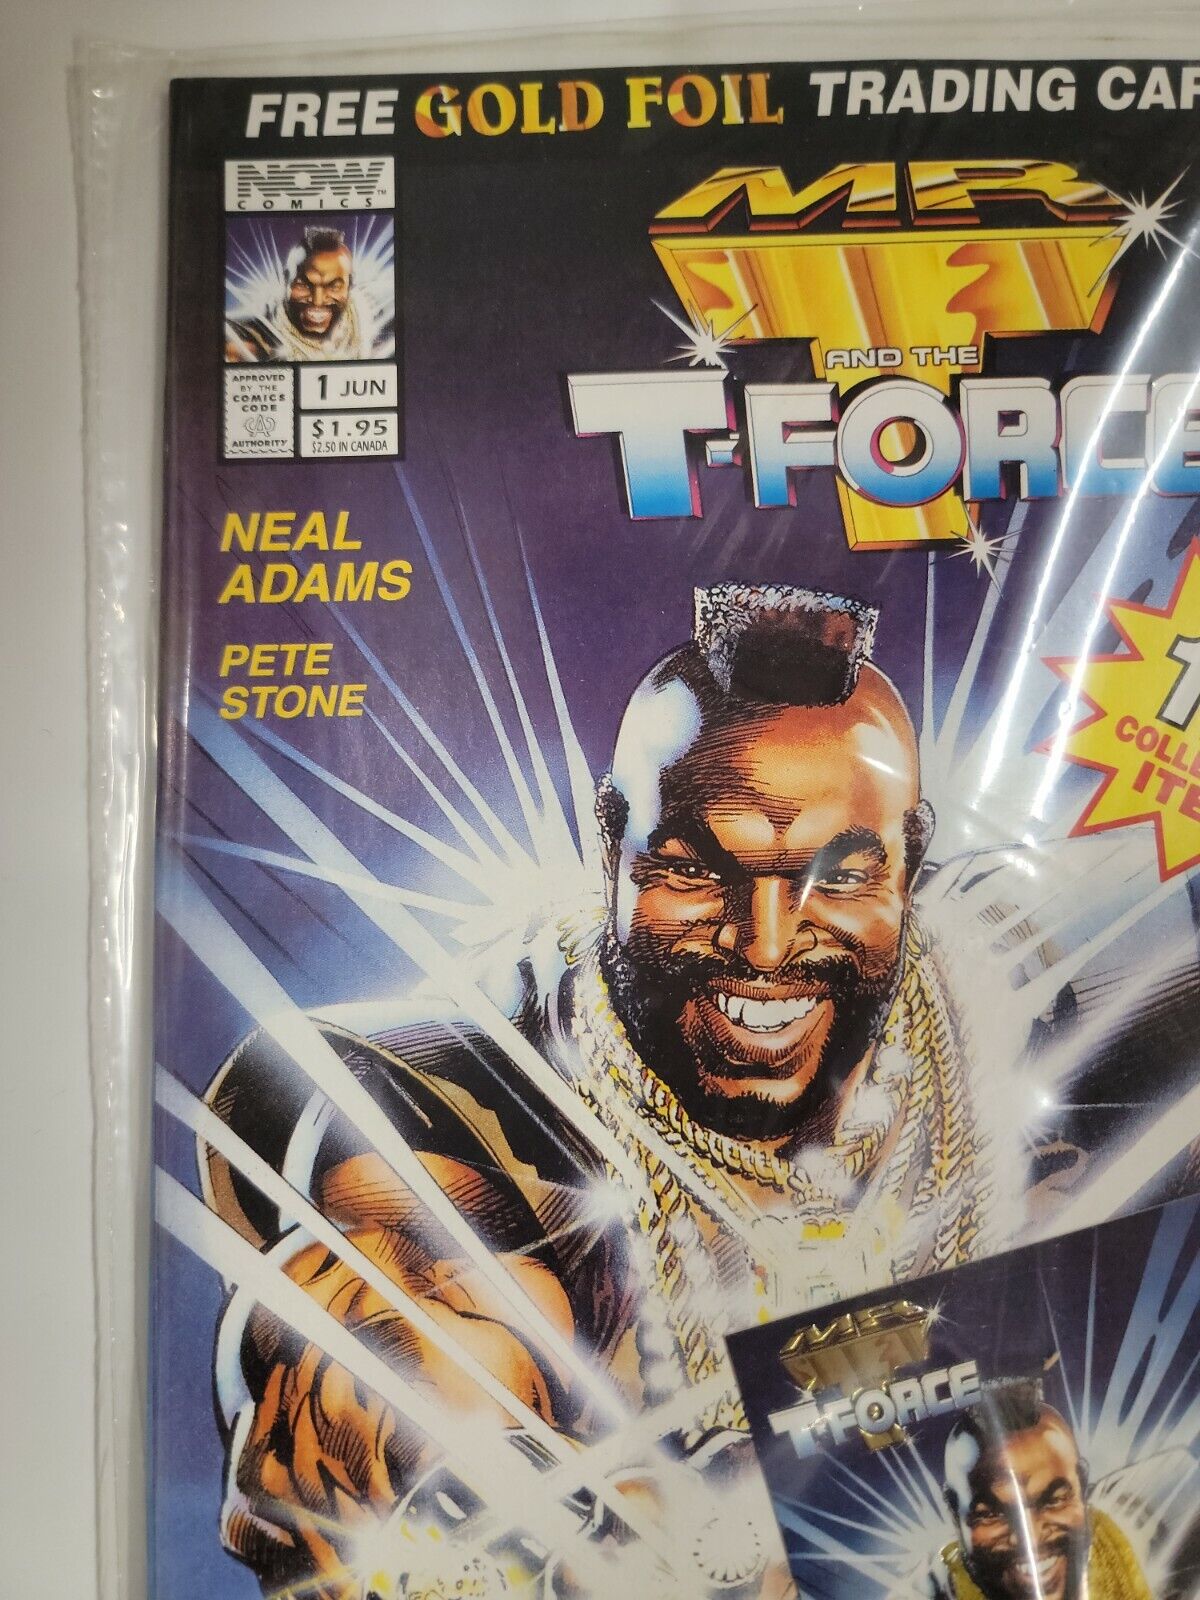 Mr. T and The T-Force #1 Comic book w/ Gold Foil Trading Card Neal Adams NM